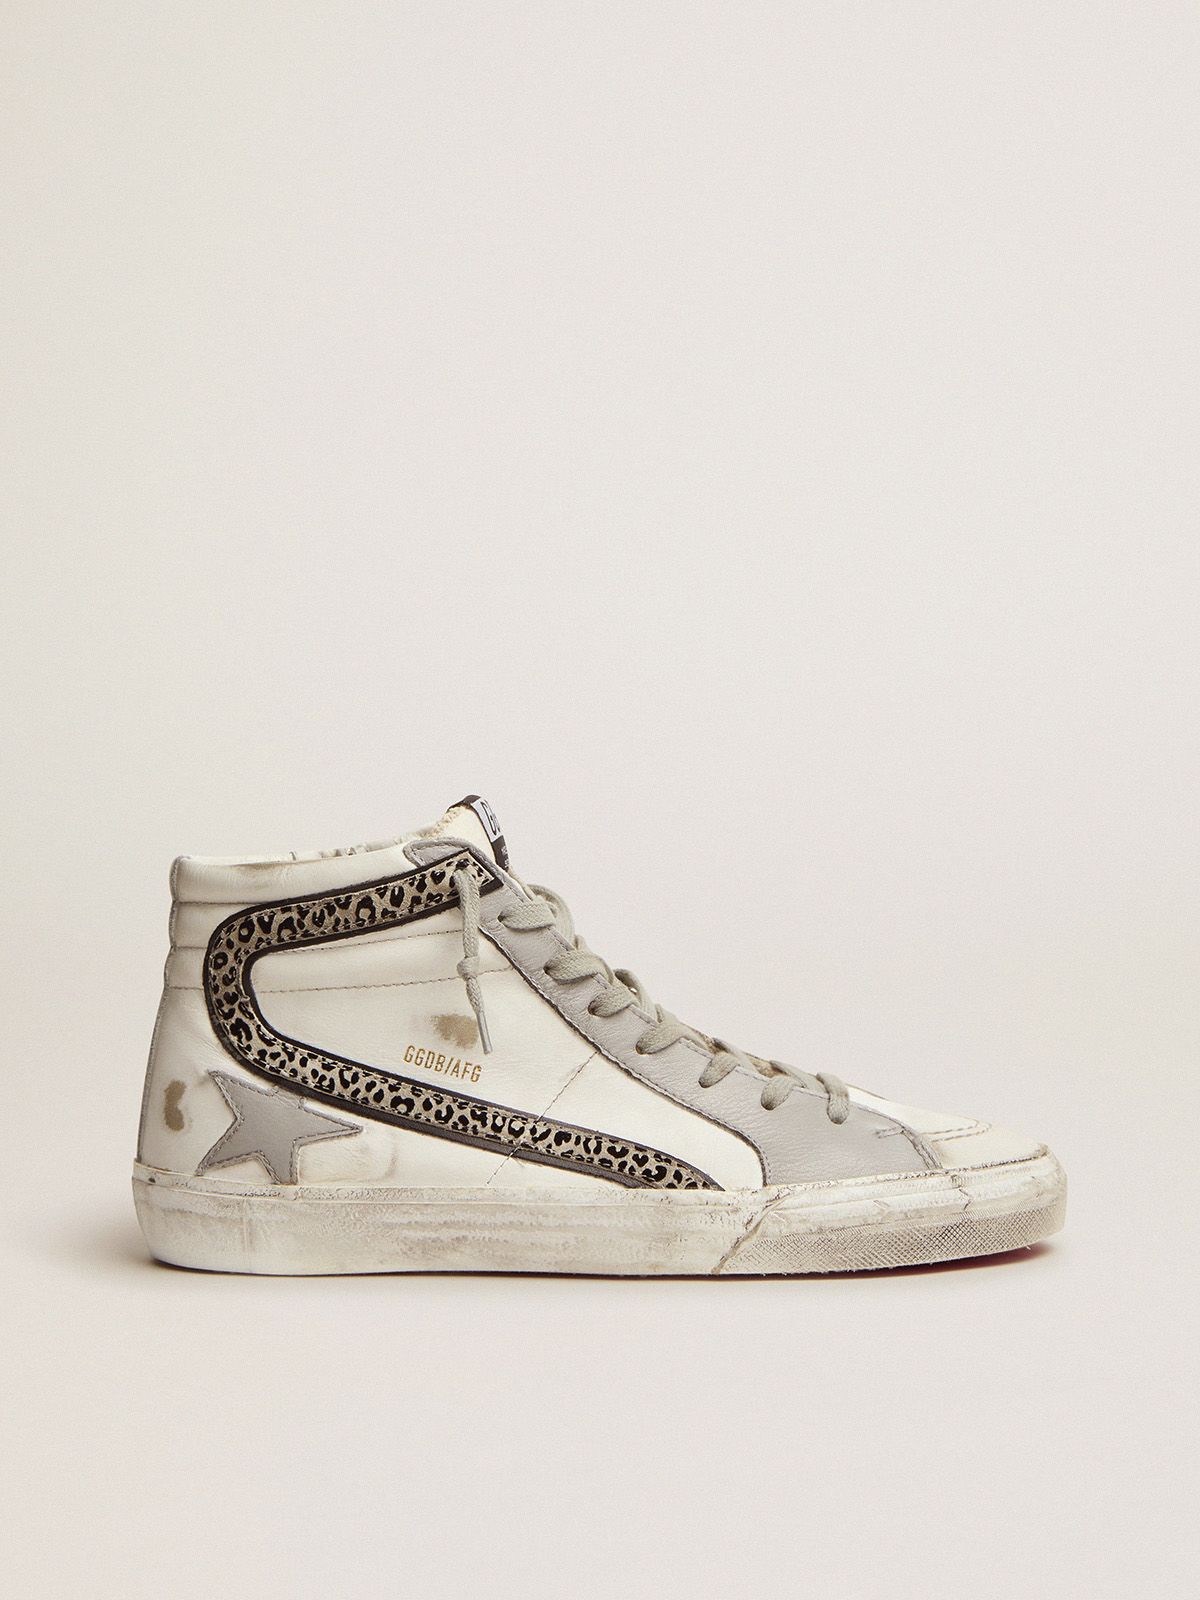 golden goose and upper Slide suede sneakers white flash animal-print with leather